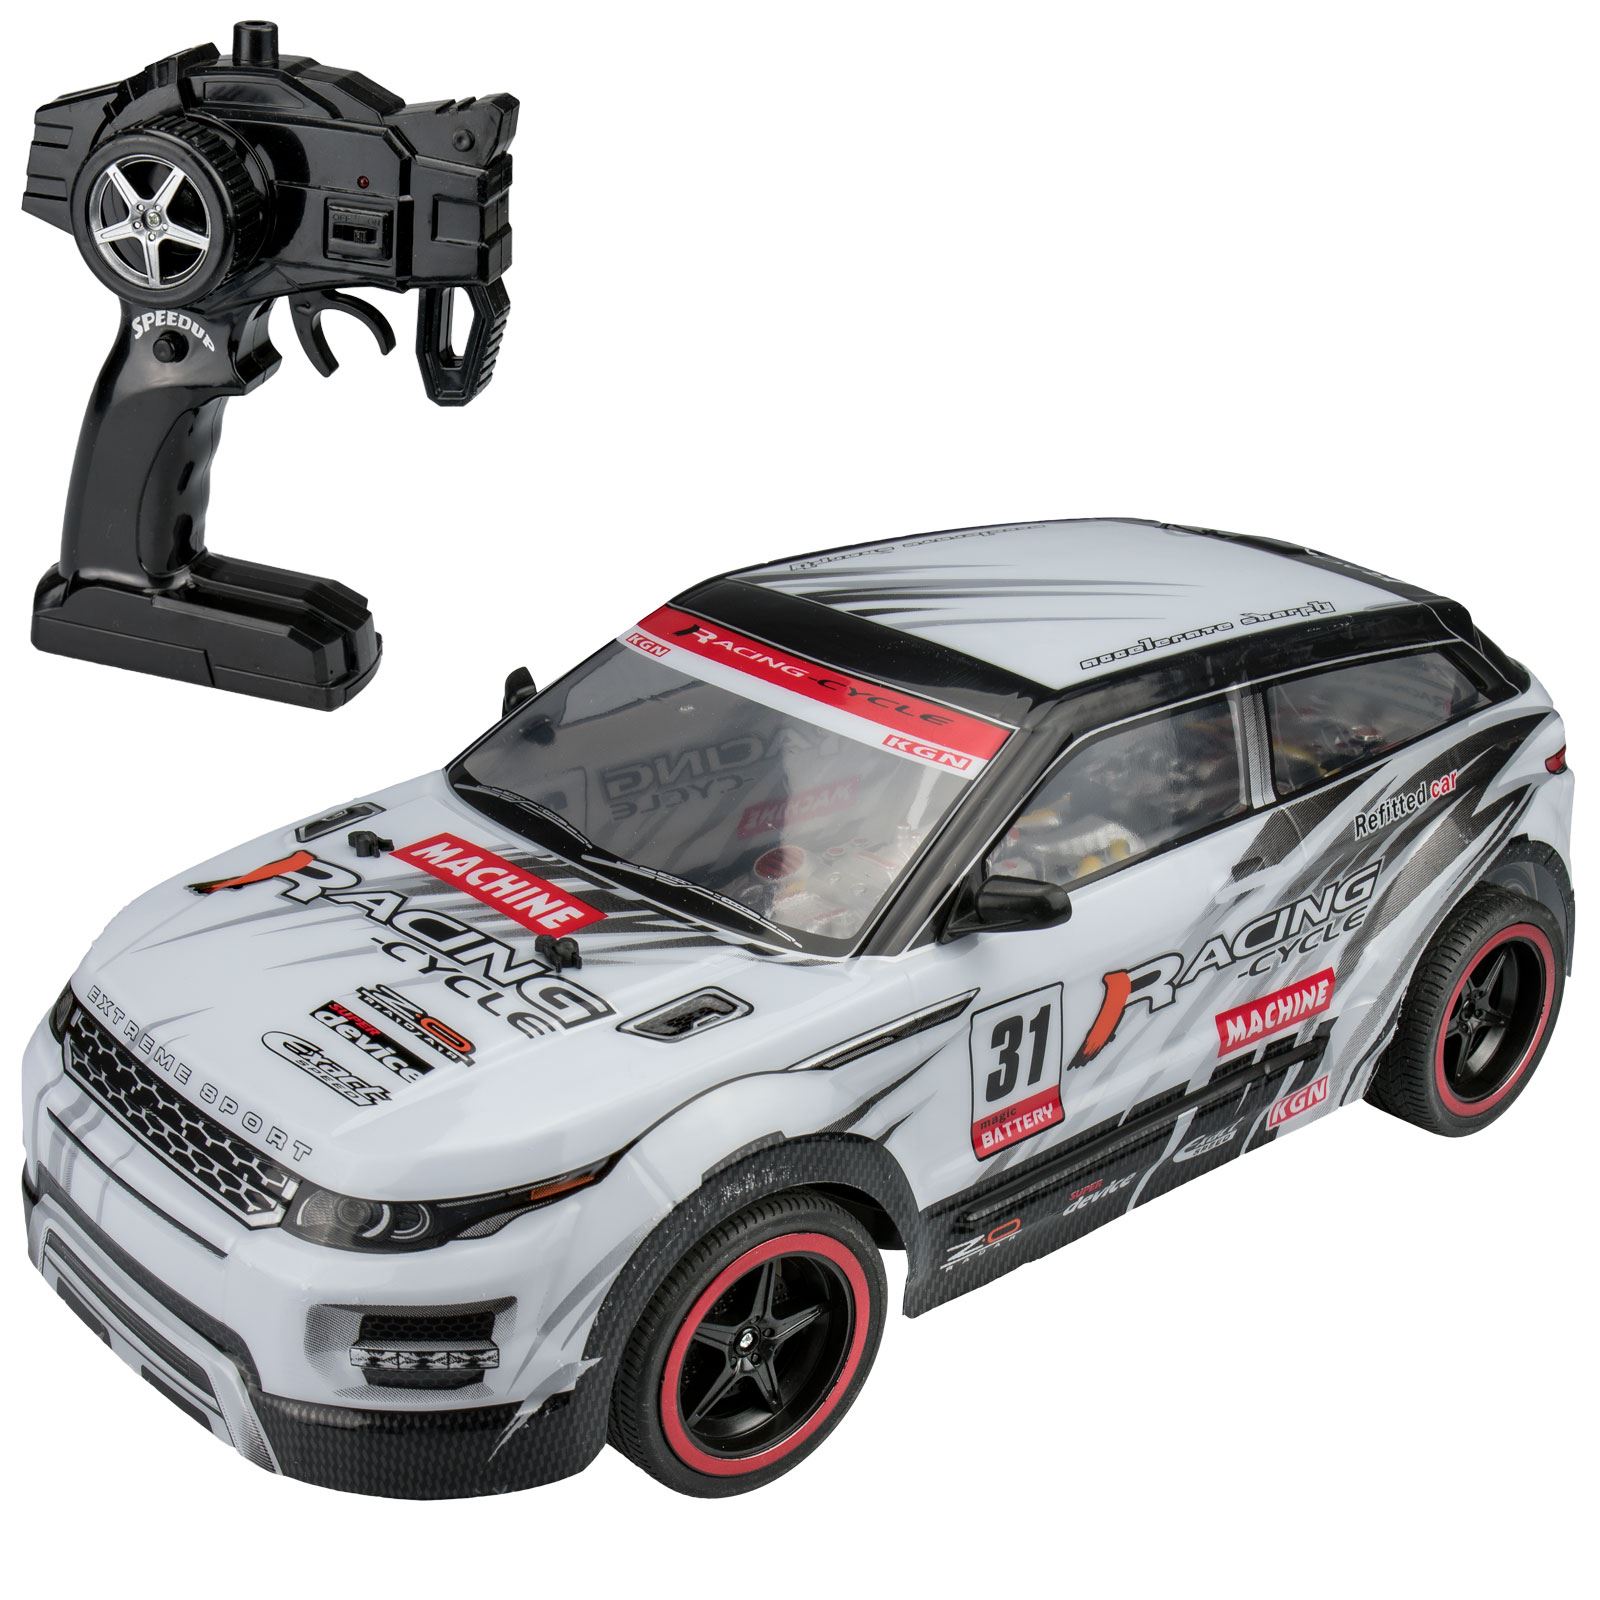 1:10 Speed Racing Rc Radio Control Car 5 Function Electric Trigger ...